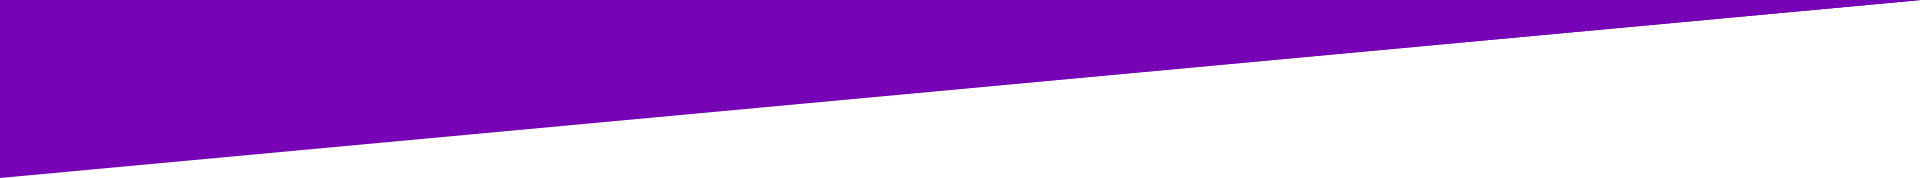 A piece of purple paper is laying on a white surface.